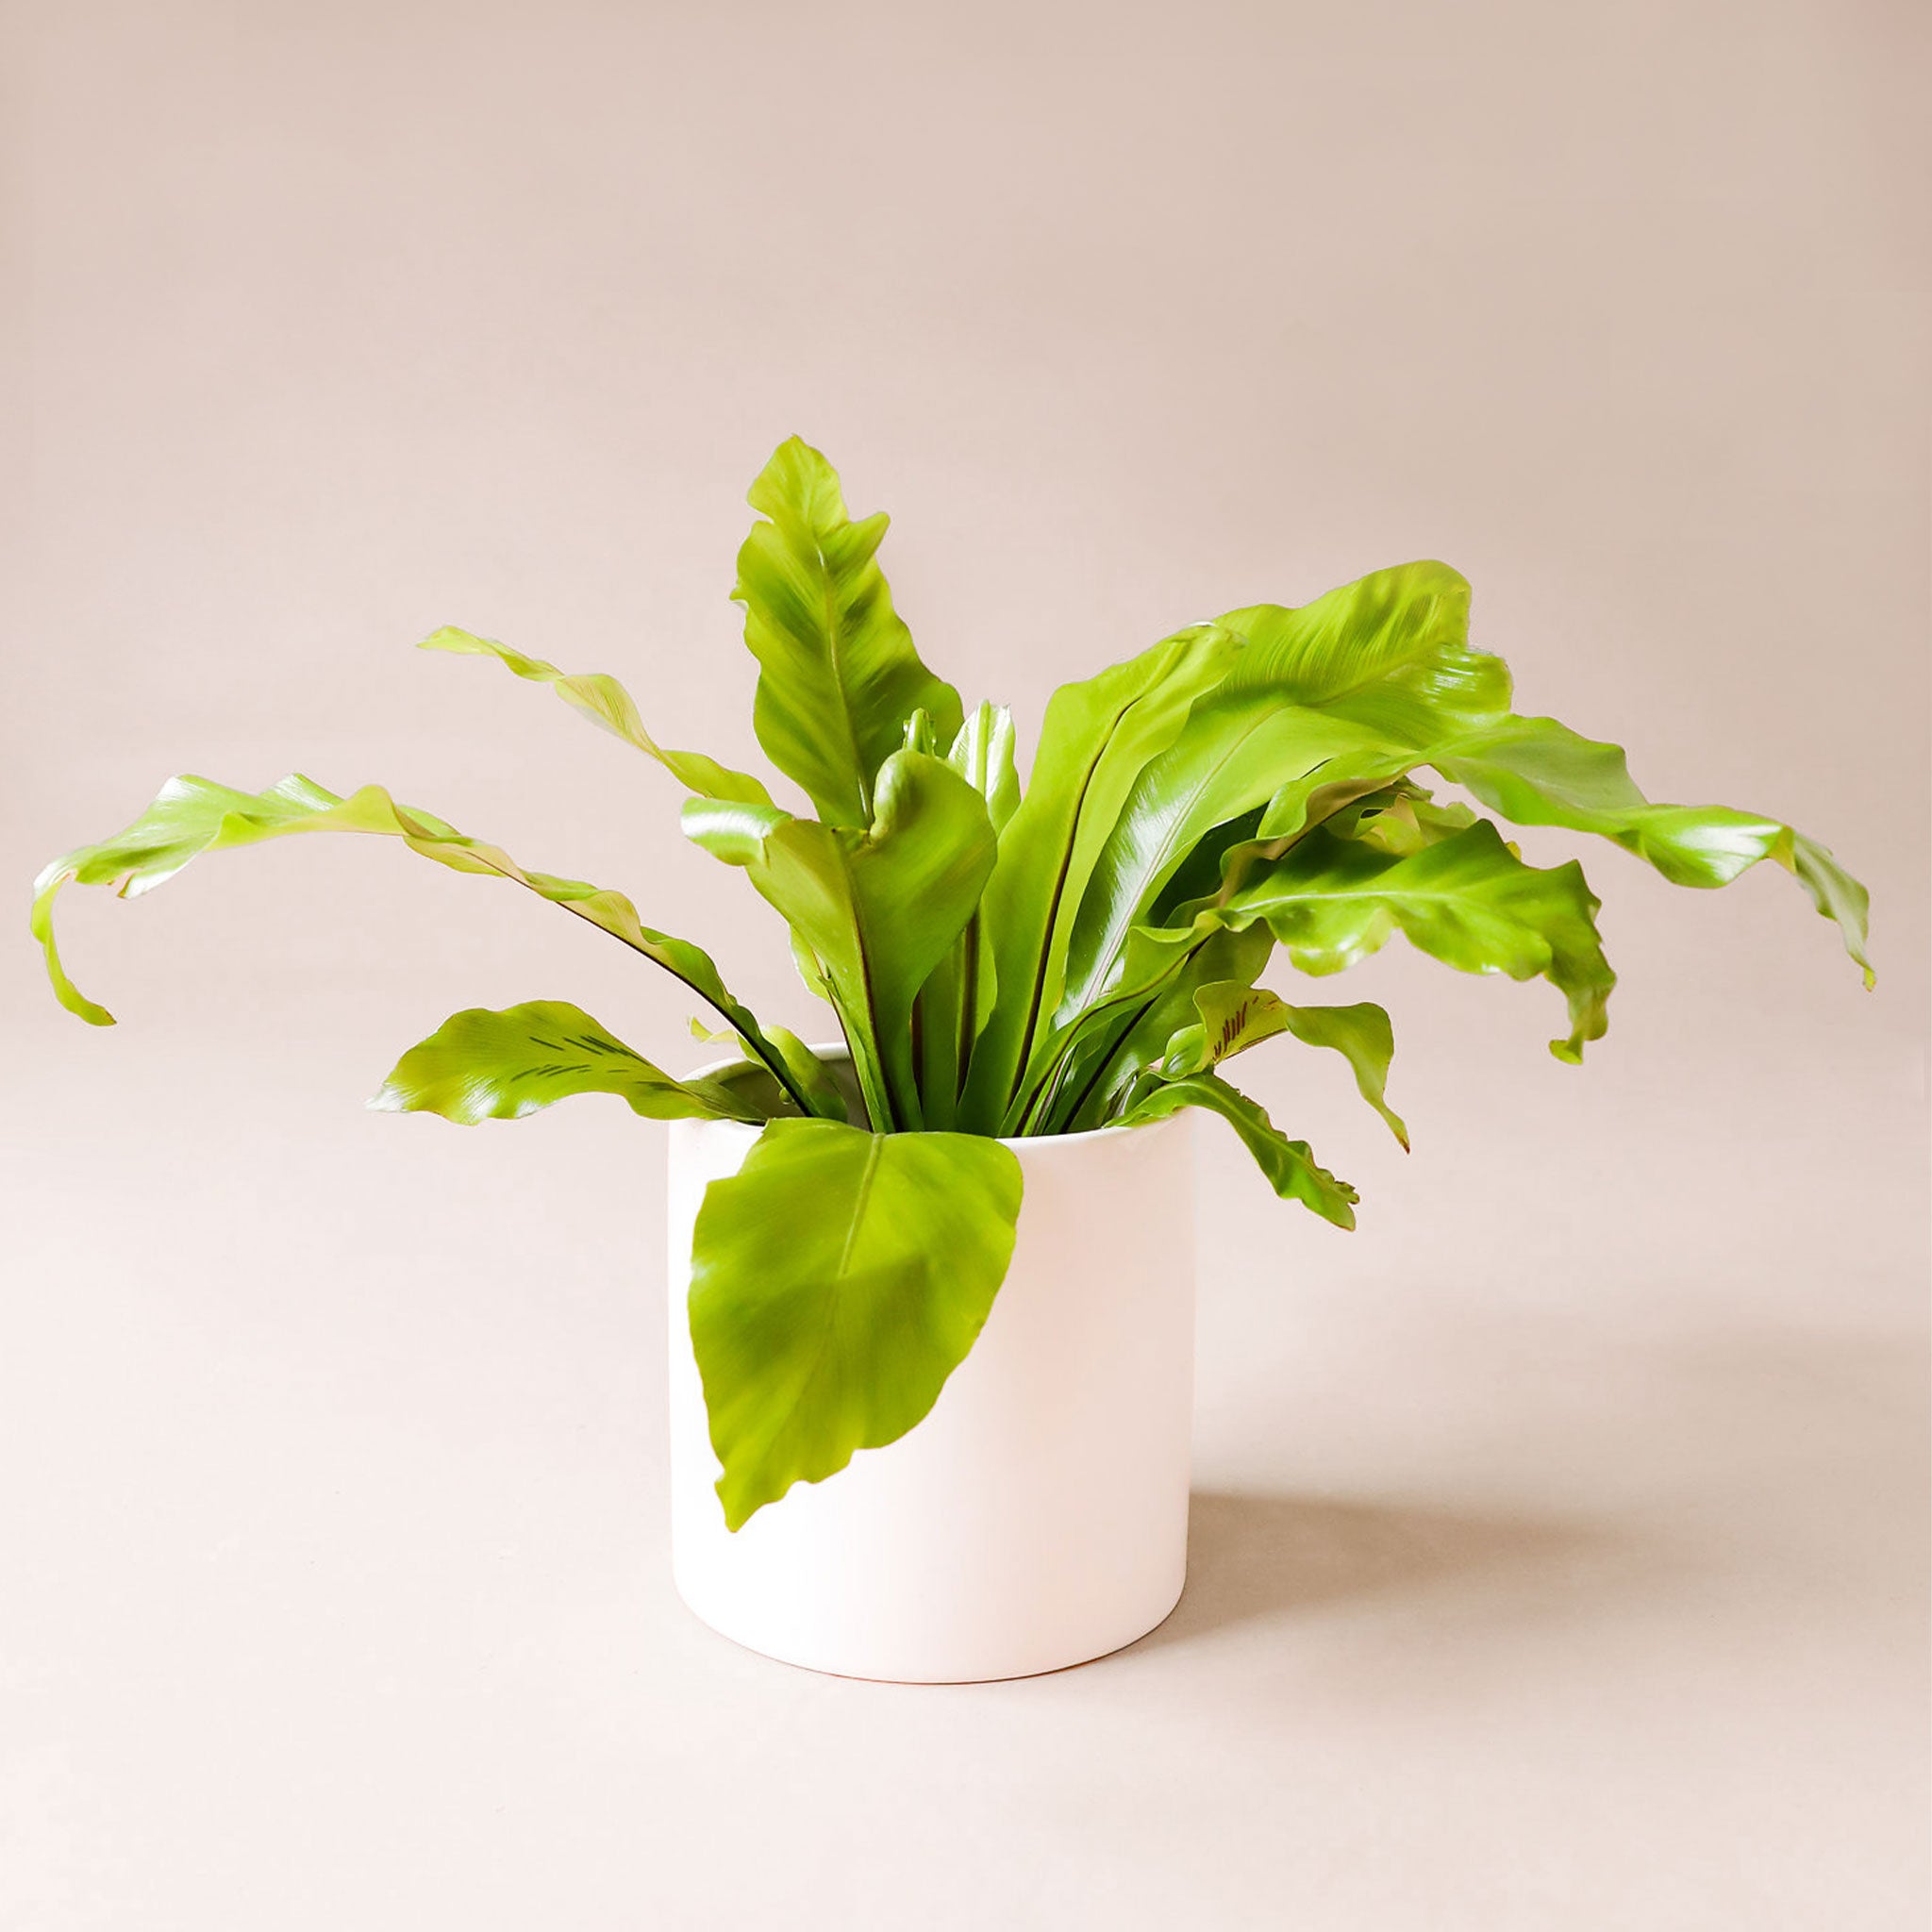 Bird's Nest Fern planted in a smooth white pot. Bird's Nest Fern is a cluster of long wide bright green fronds.